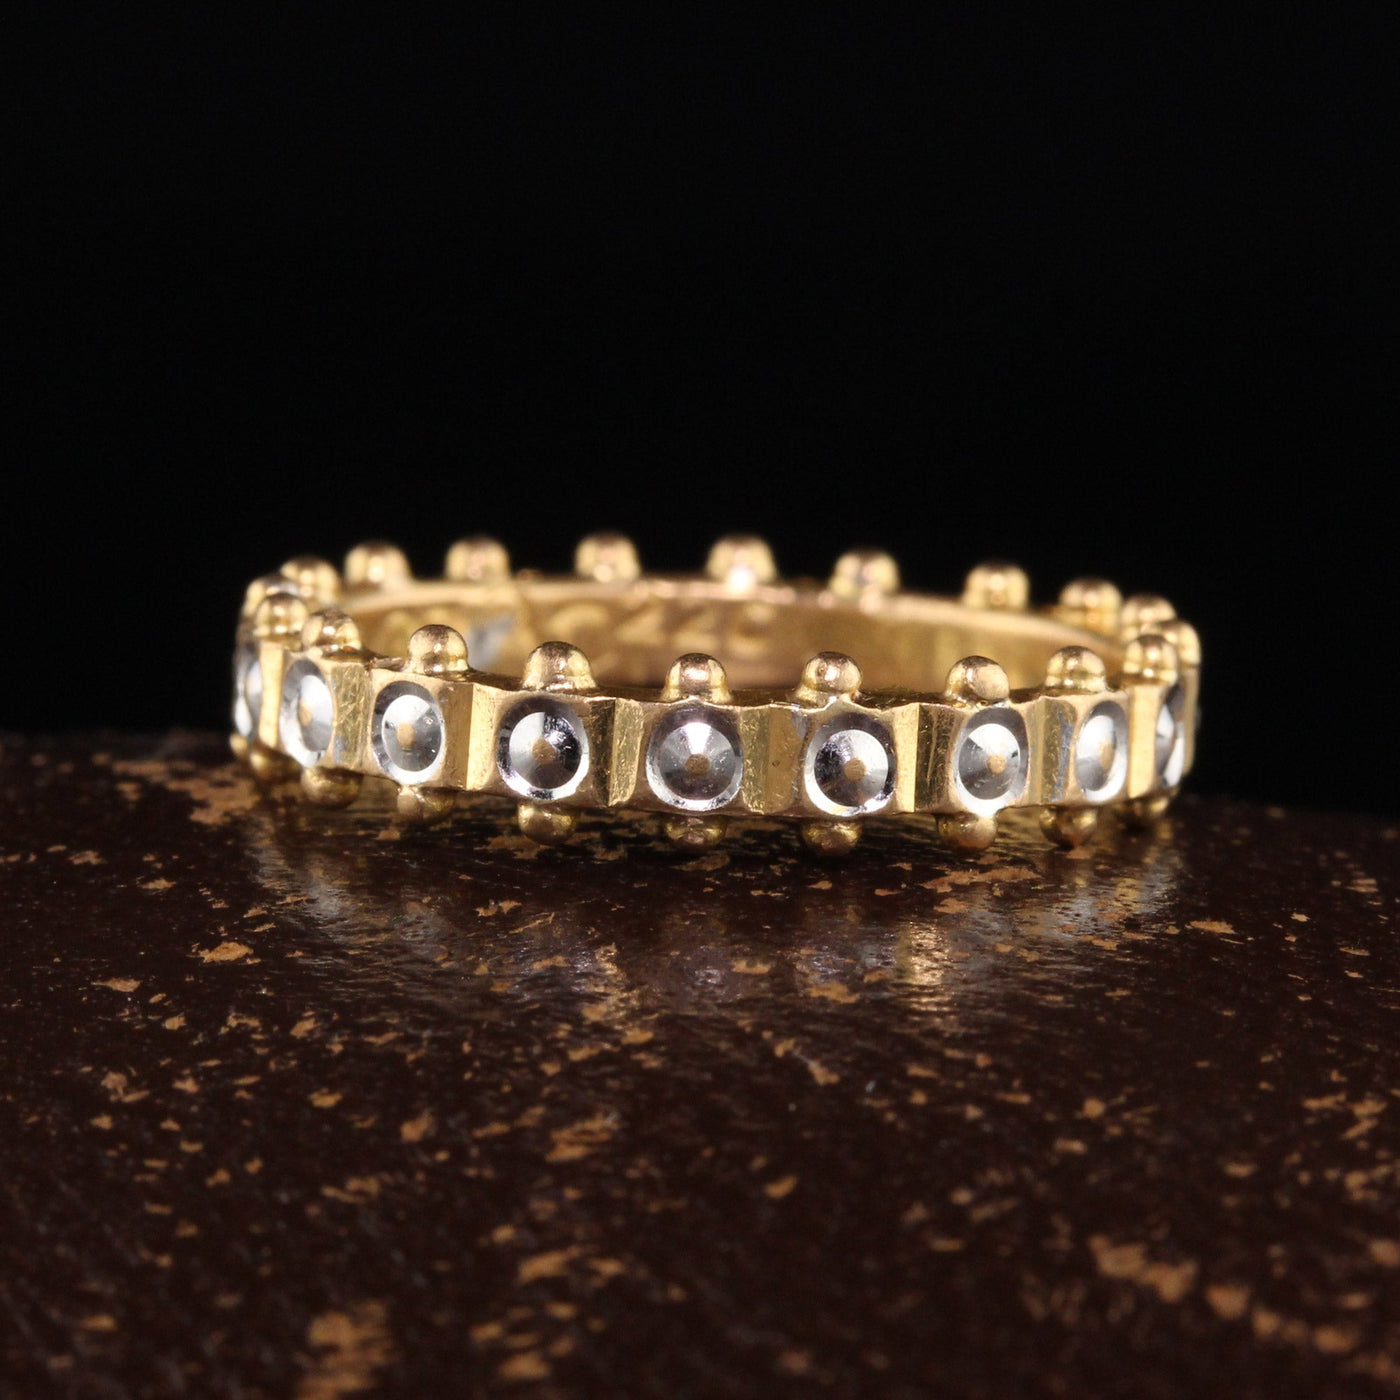 RESERVED - Layaway 3 of 3 - Vintage Estate 22K Yellow Gold Bead Engraved Wedding Band - Size 5 3/4